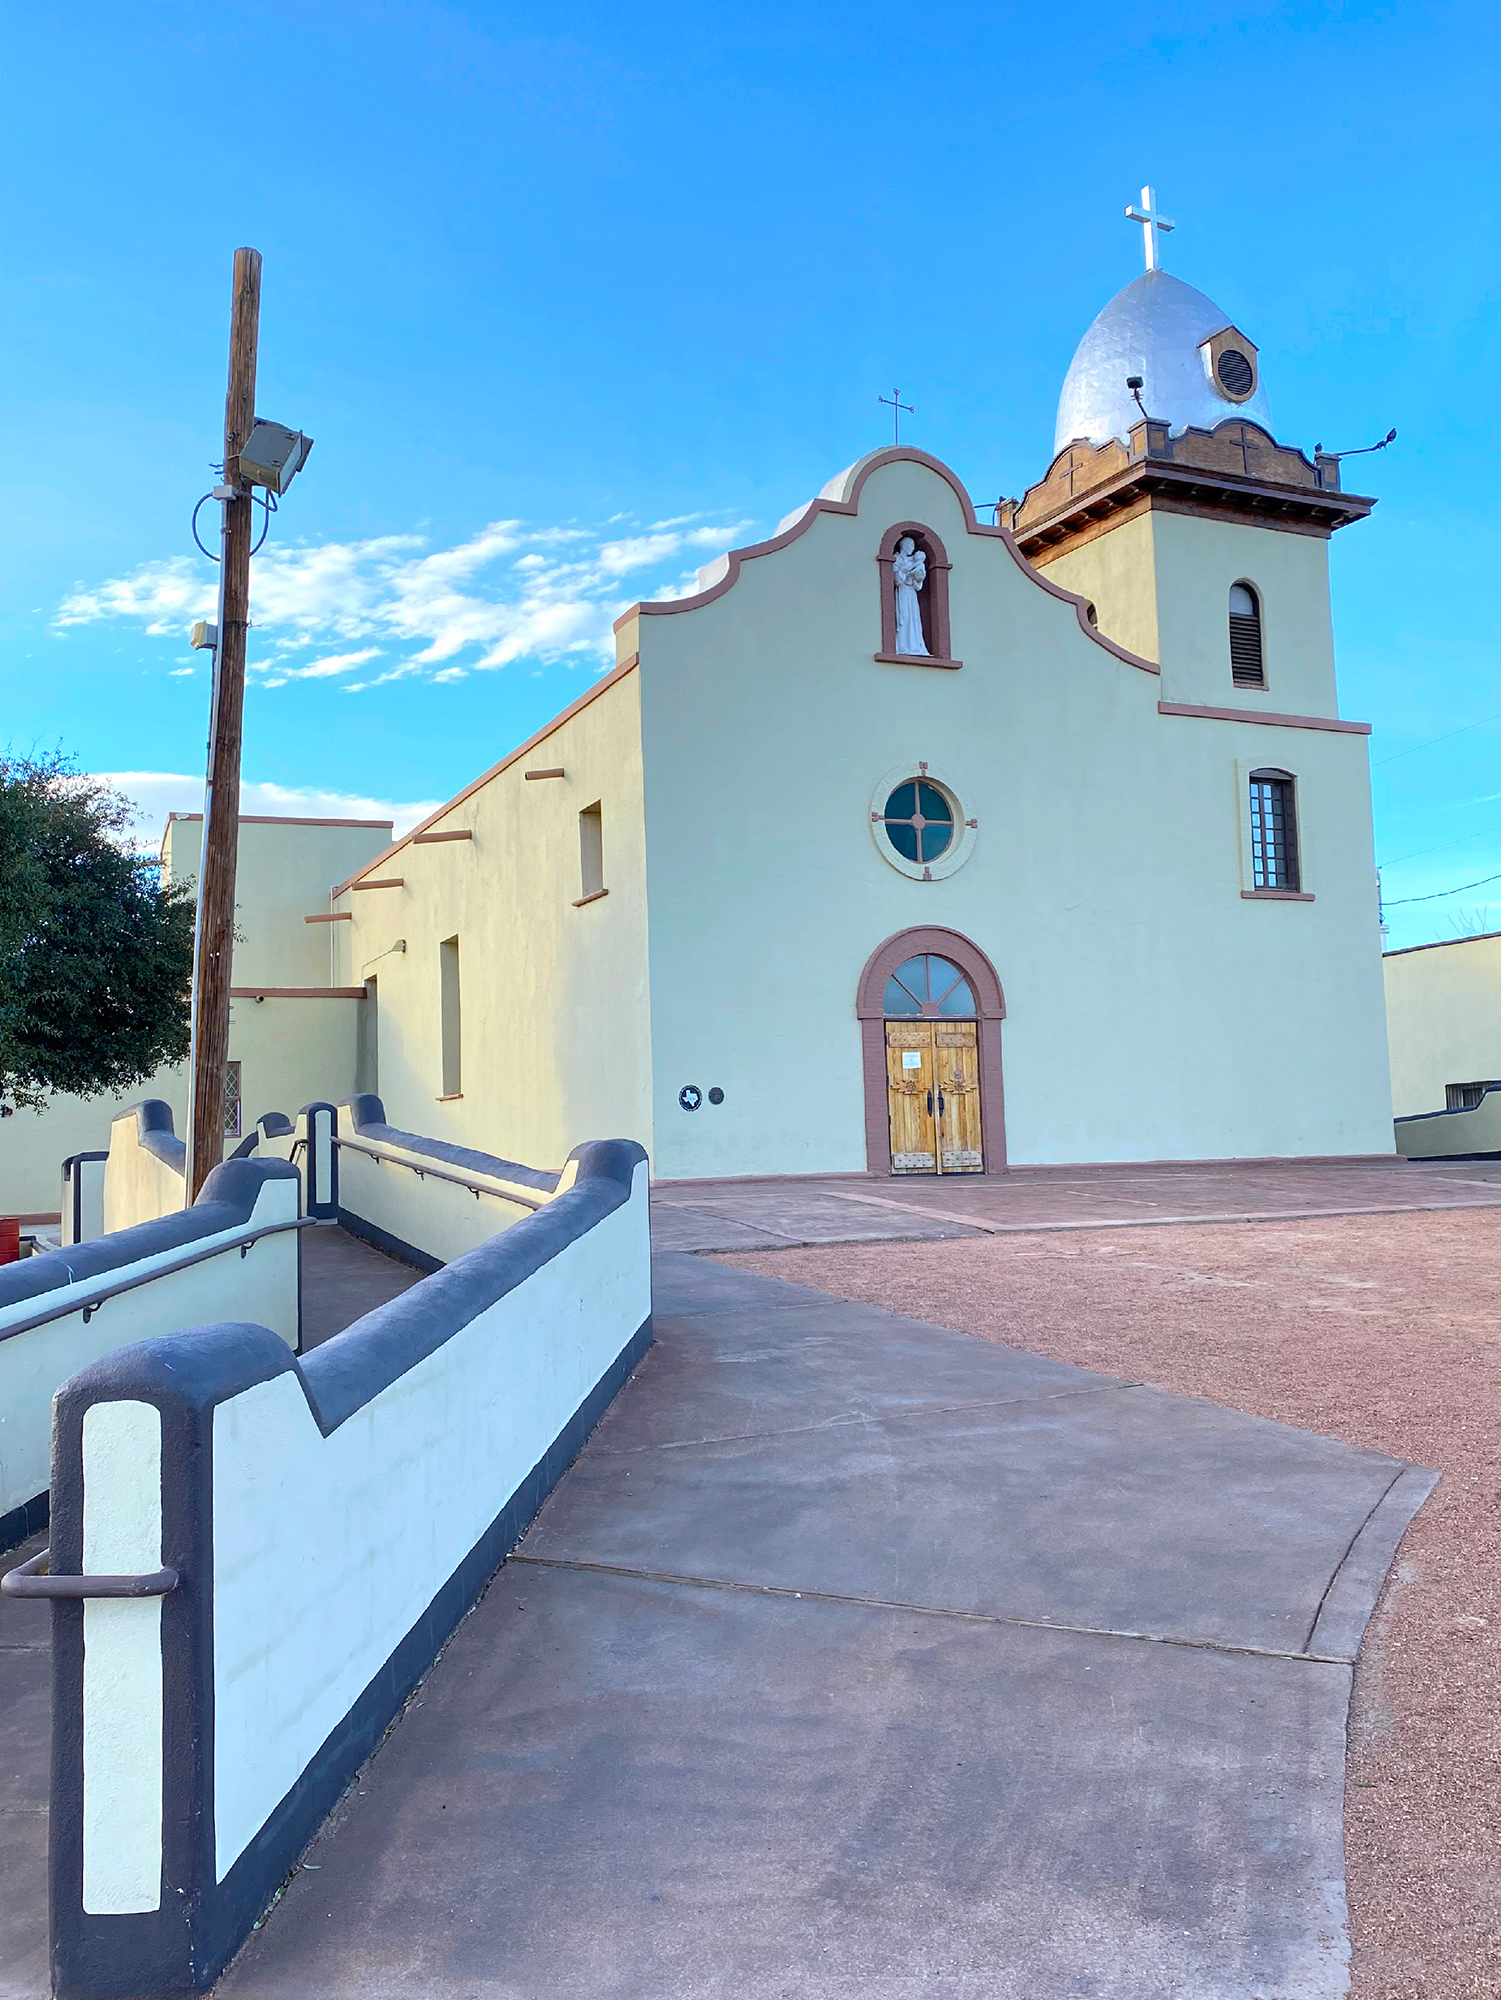 The Ysleta del Sur Mission stands at the end of a terra cotta-colored pathway